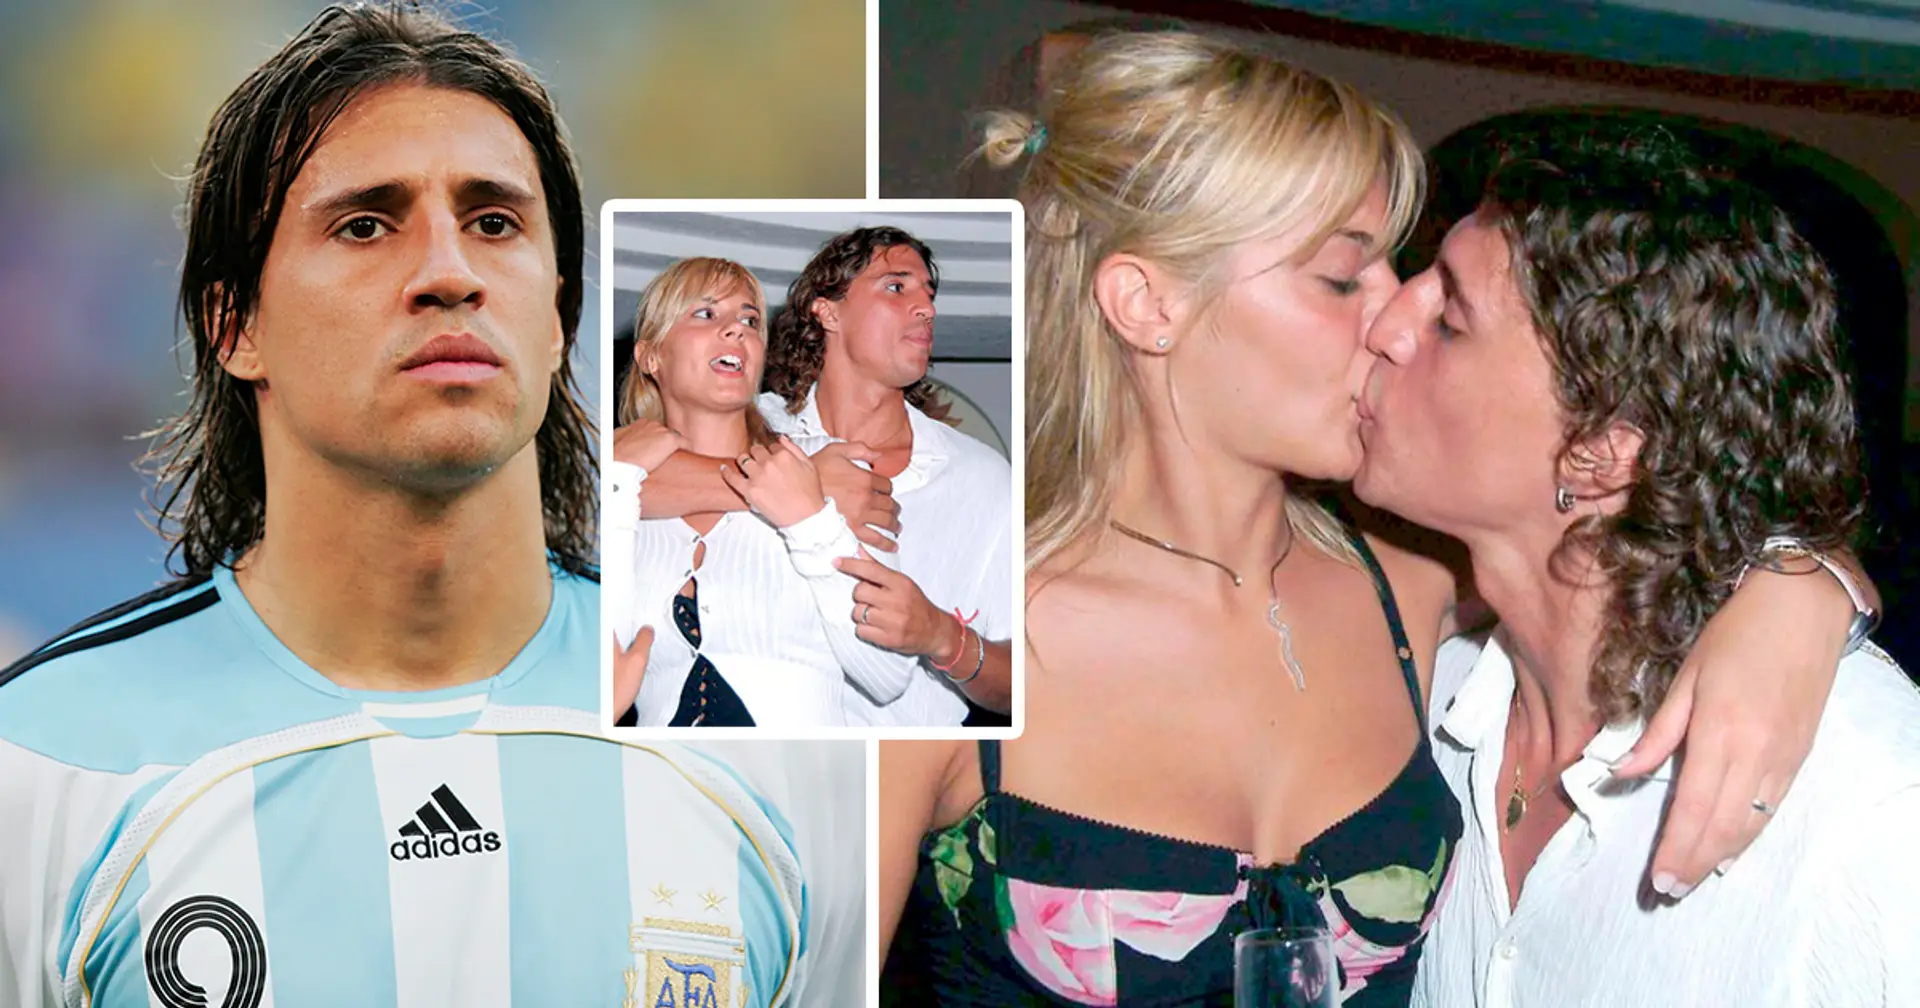 Hernan Crespo: 'I had orgies with many women. And I'm not proud of that'